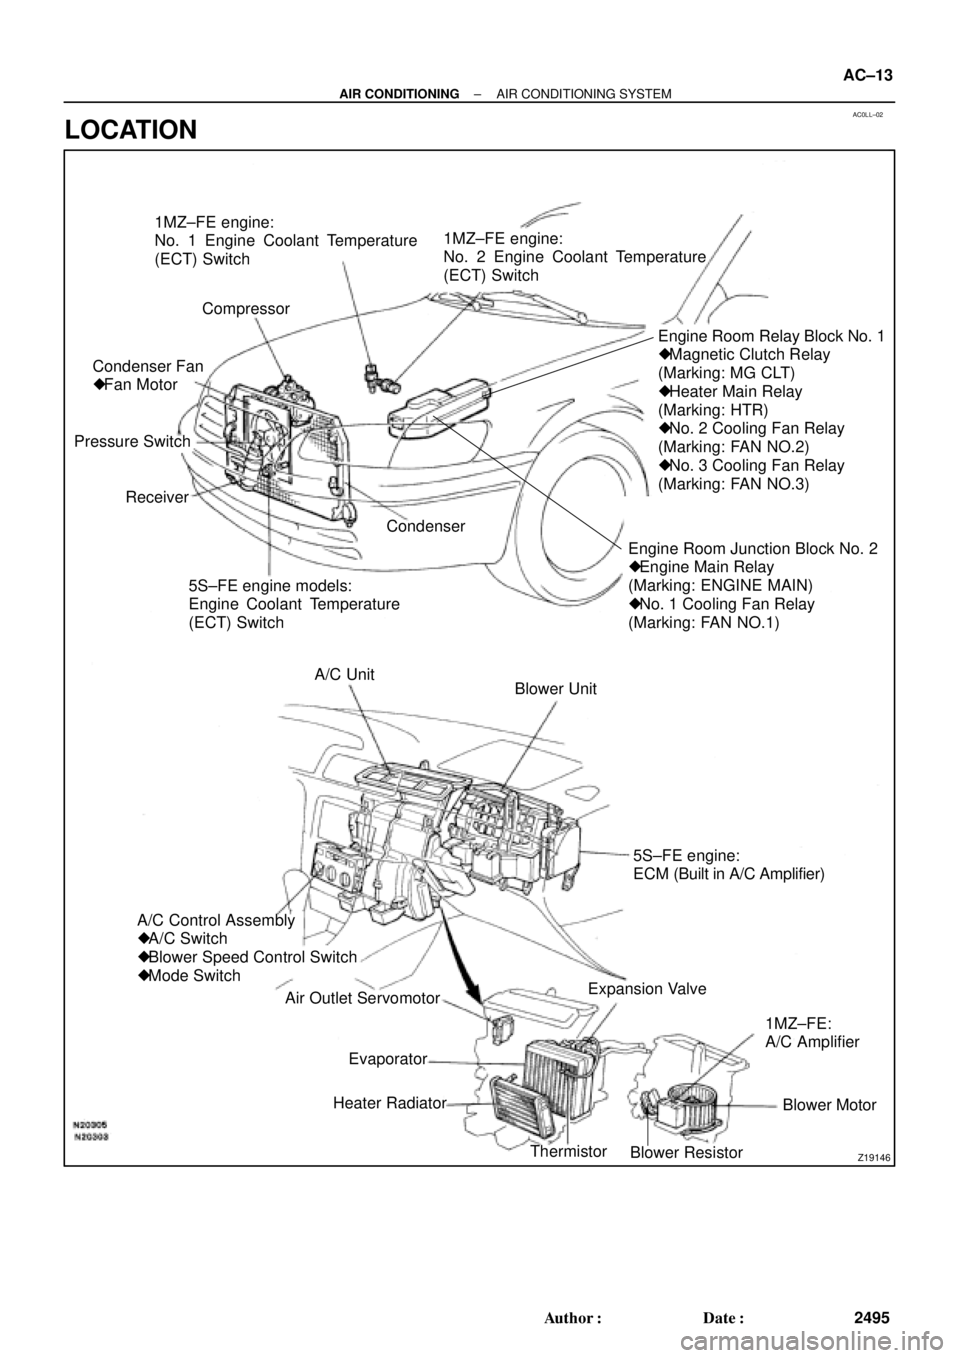 TOYOTA CAMRY 1999  Service Repair Manual AC0LL±02
Z19146
1MZ±FE engine:
No. 1 Engine Coolant Temperature
(ECT) Switch
Compressor
Engine Room Junction Block No. 2
 Engine Main Relay
(Marking: ENGINE MAIN)
 No. 1 Cooling Fan Relay
(Marking